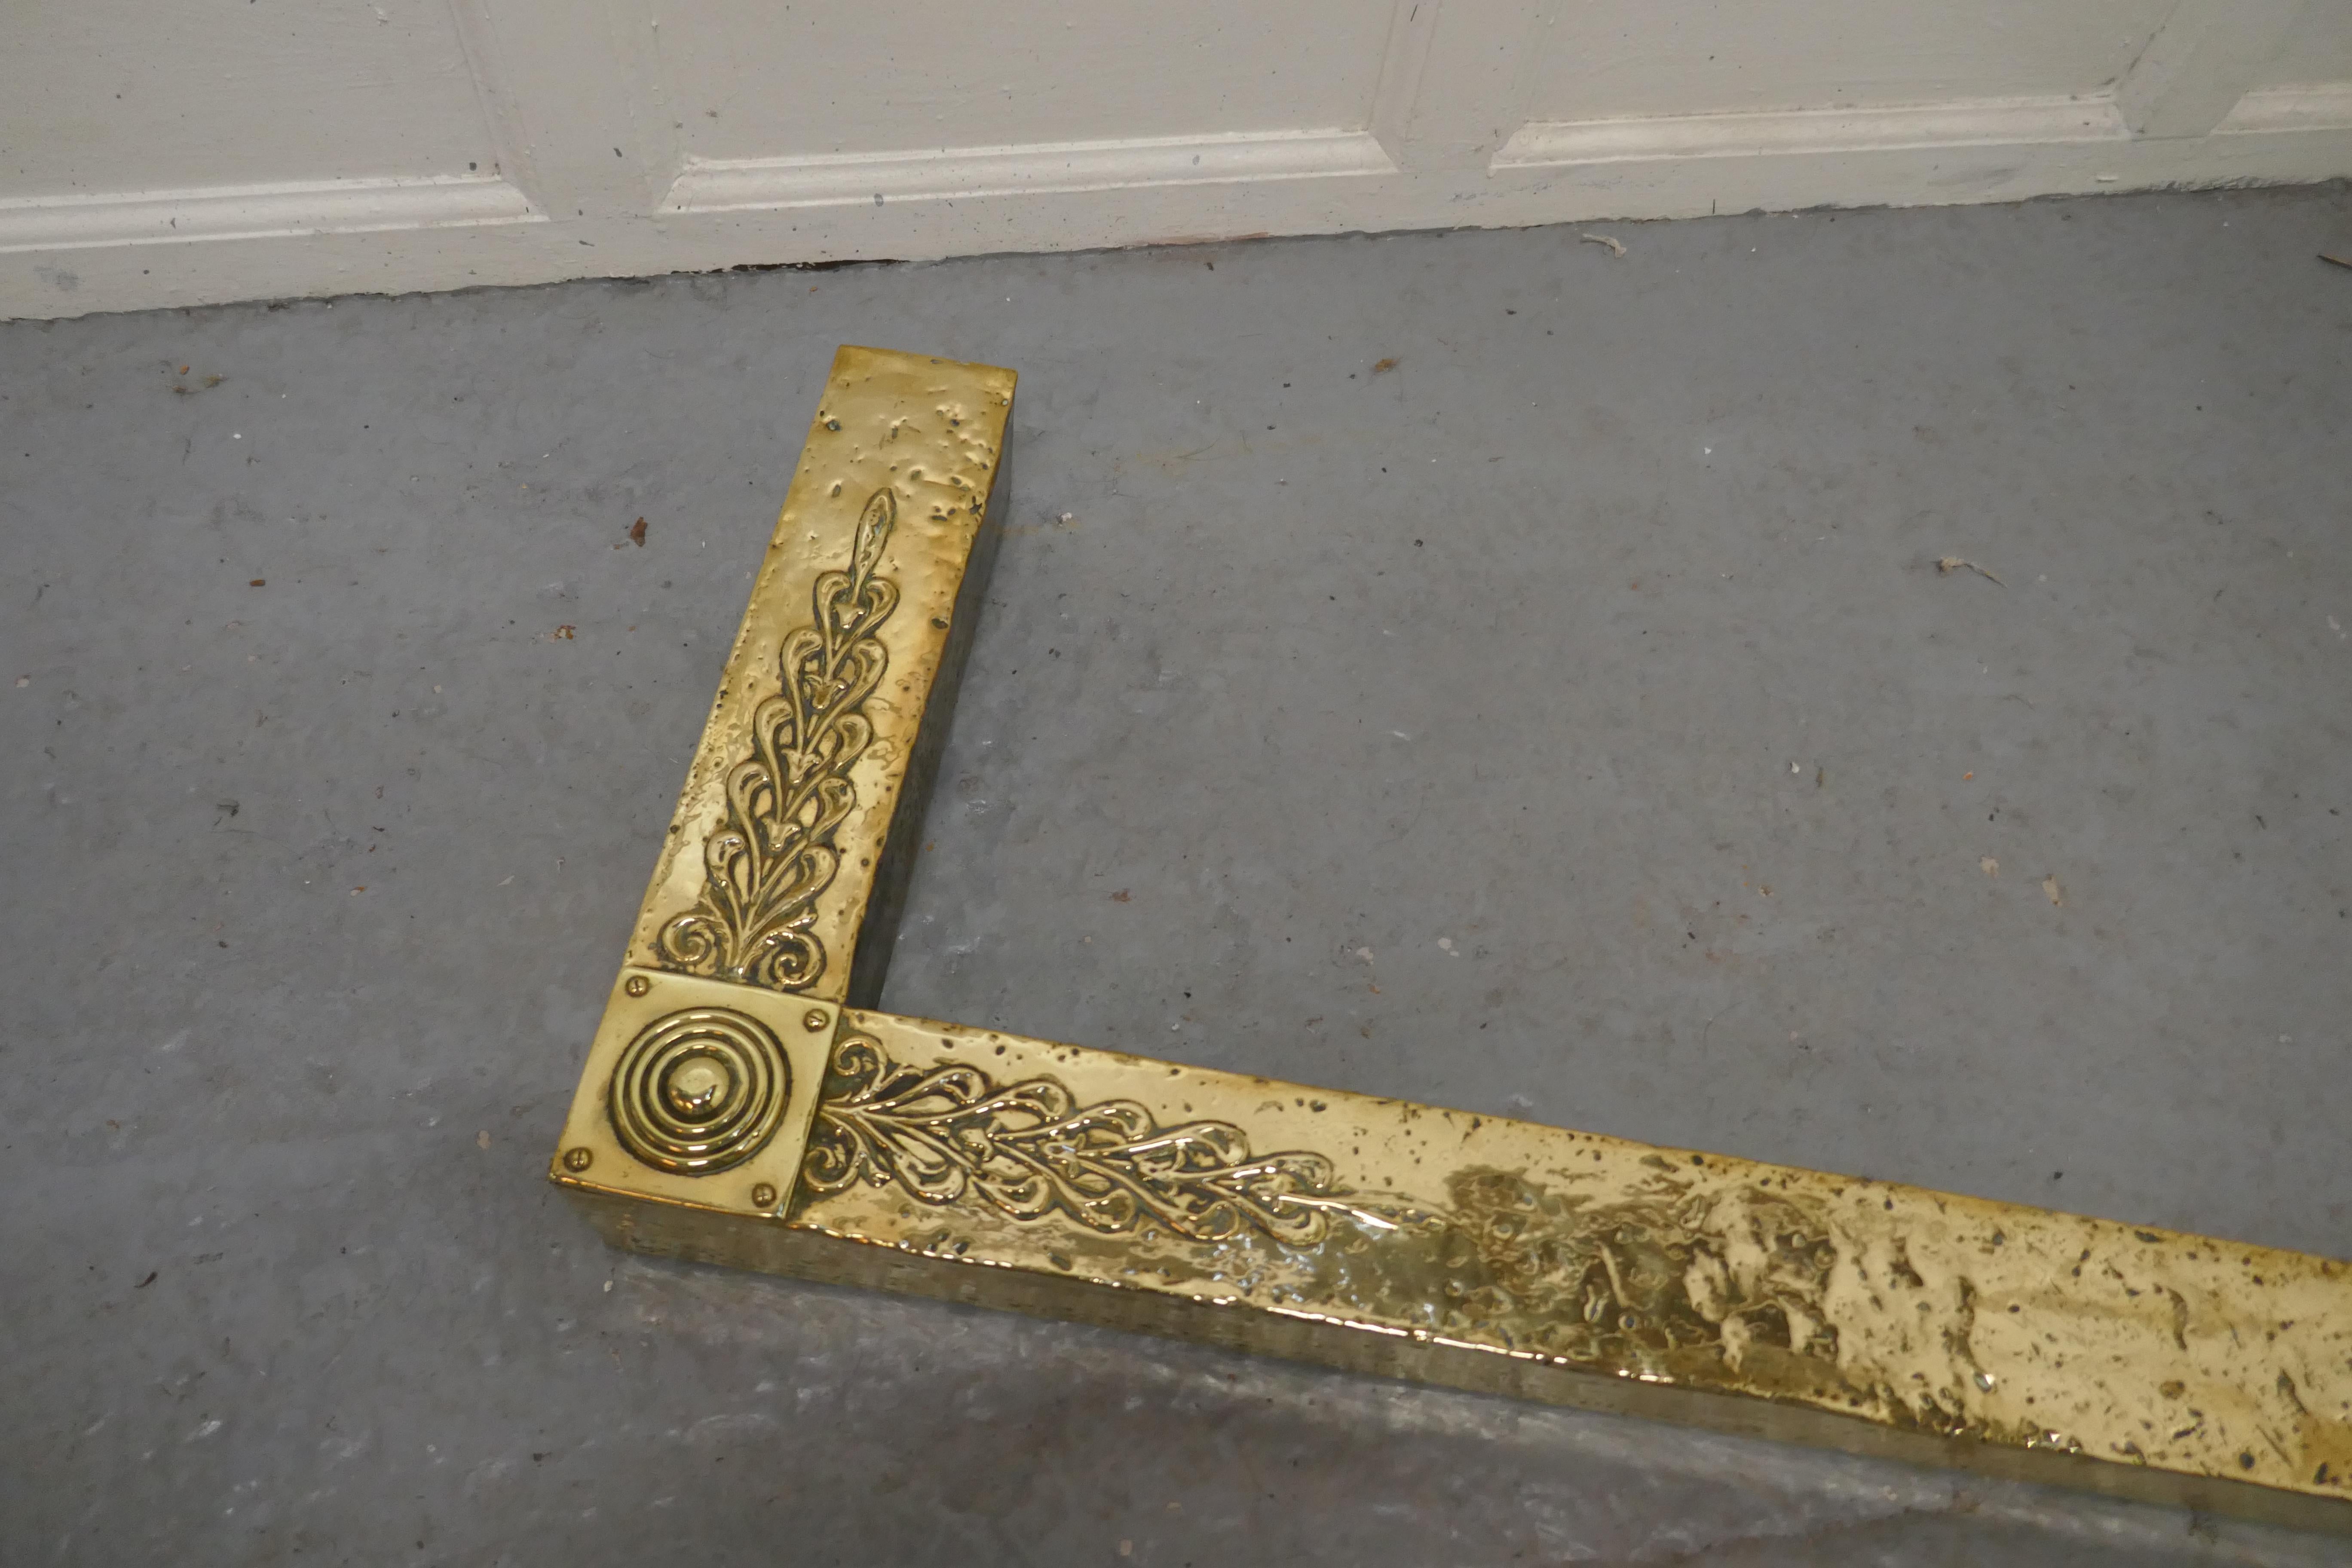 Large Arts and Crafts brass fender

This is a good large Victorian beaten brass fender it has Art and Crafts decoration, a roundel and swag decoration worked in the brass at the corners
The fender is in good condition it is 3” high, and 57” long